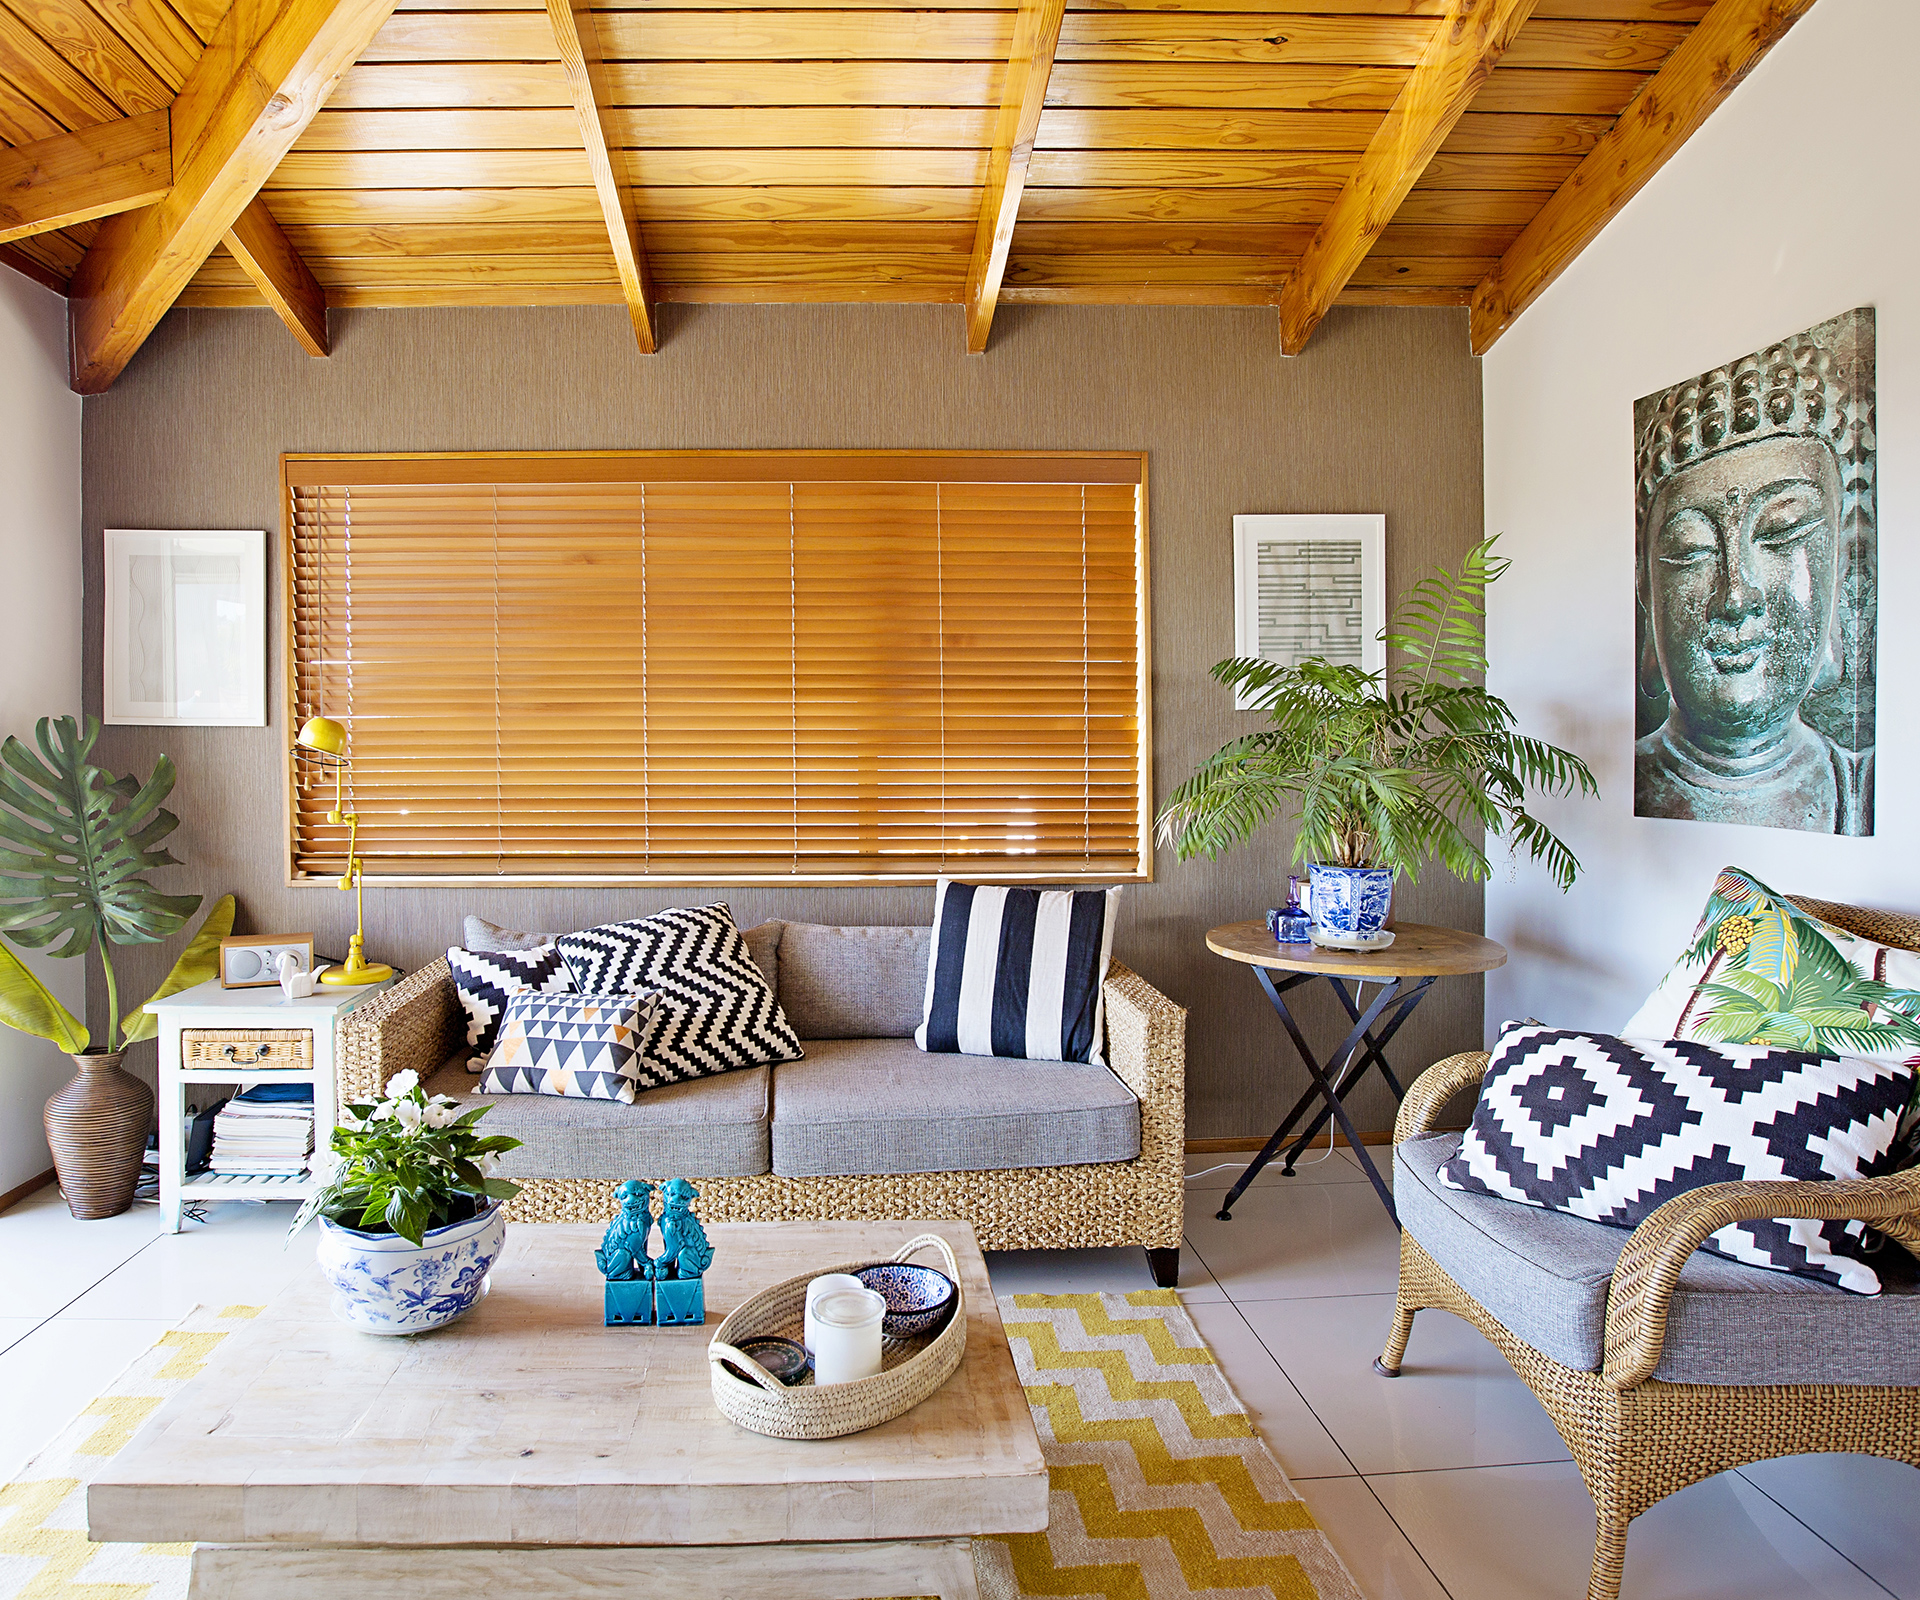 A 1970s-style home is redecorated with tropical-style decor